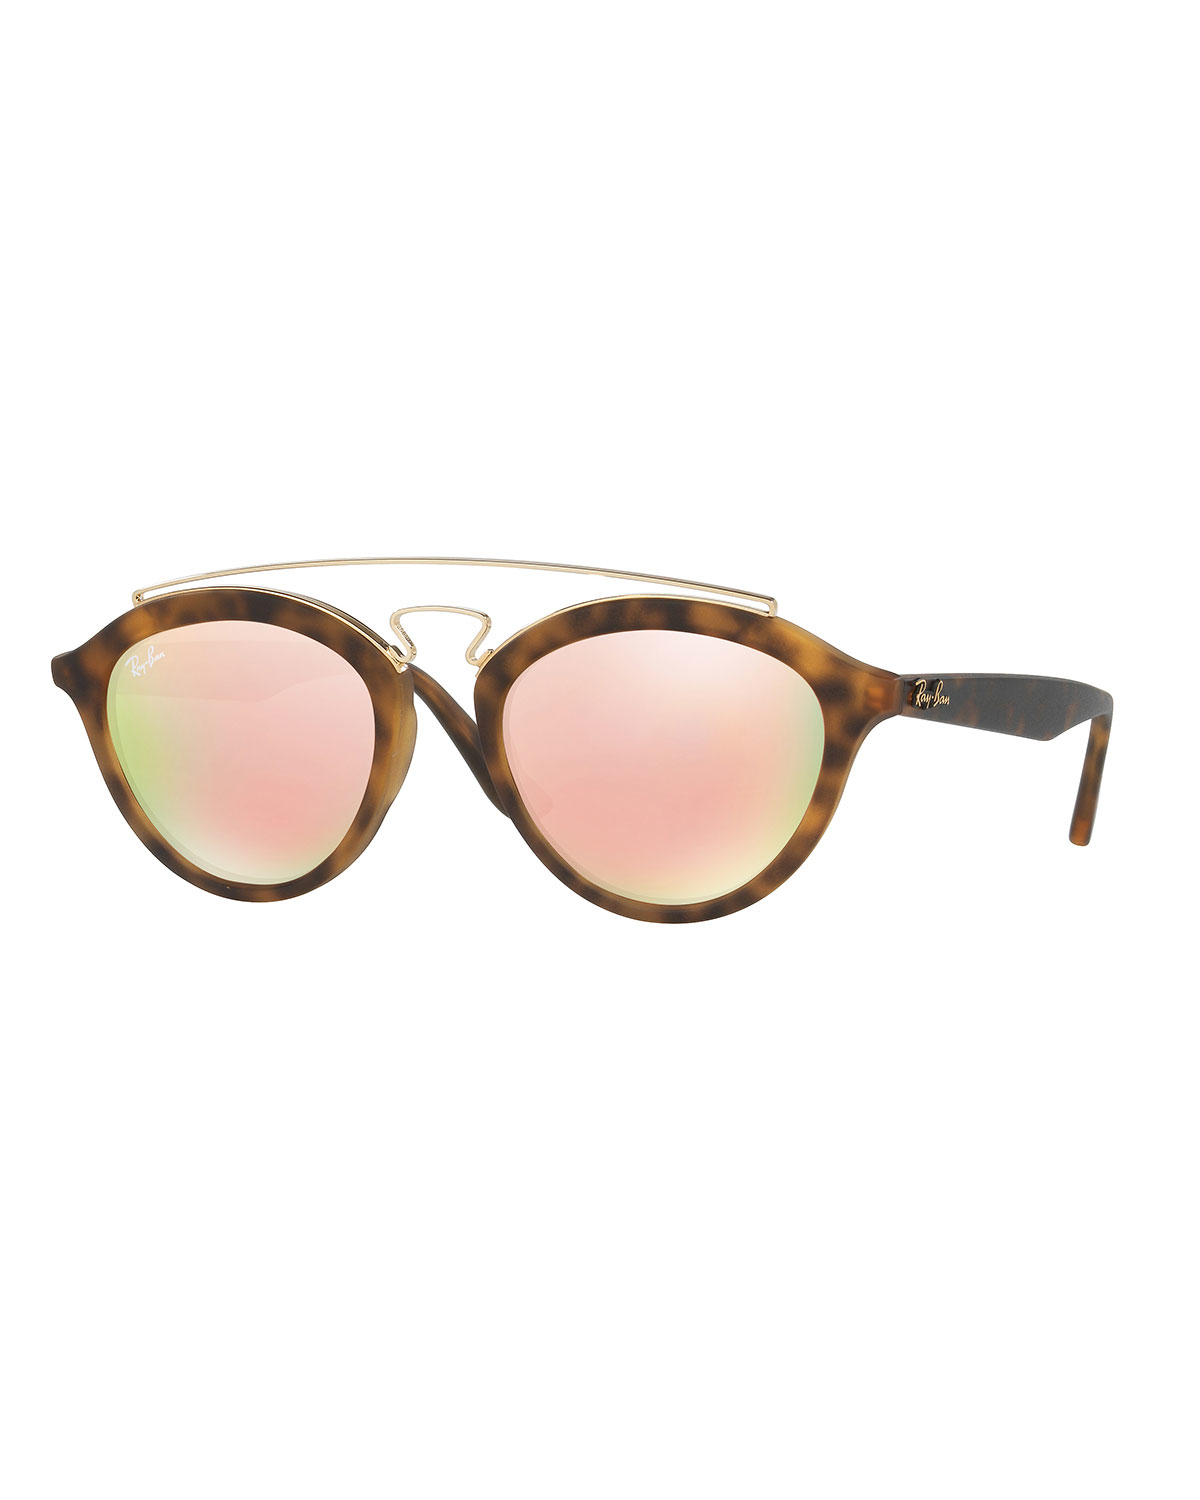 Ray-ban Mirrored Brow-bar Sunglasses in Brown | Lyst